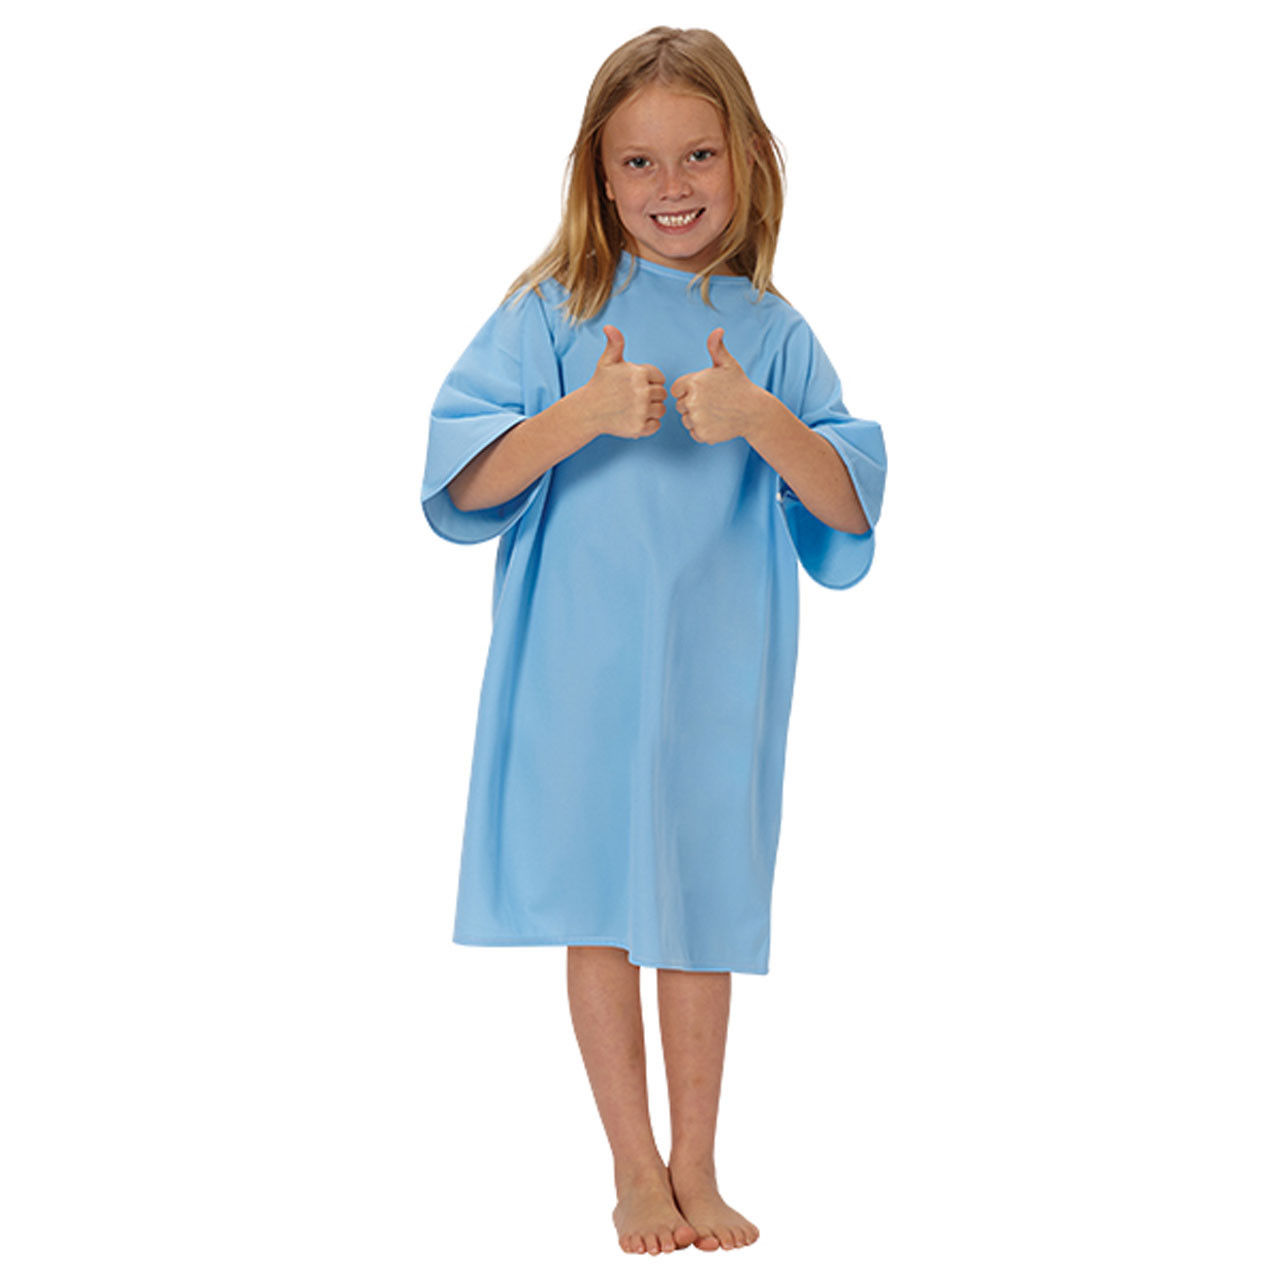 Is the blue hospital gown pediatric size with regular or extra wide sleeves?